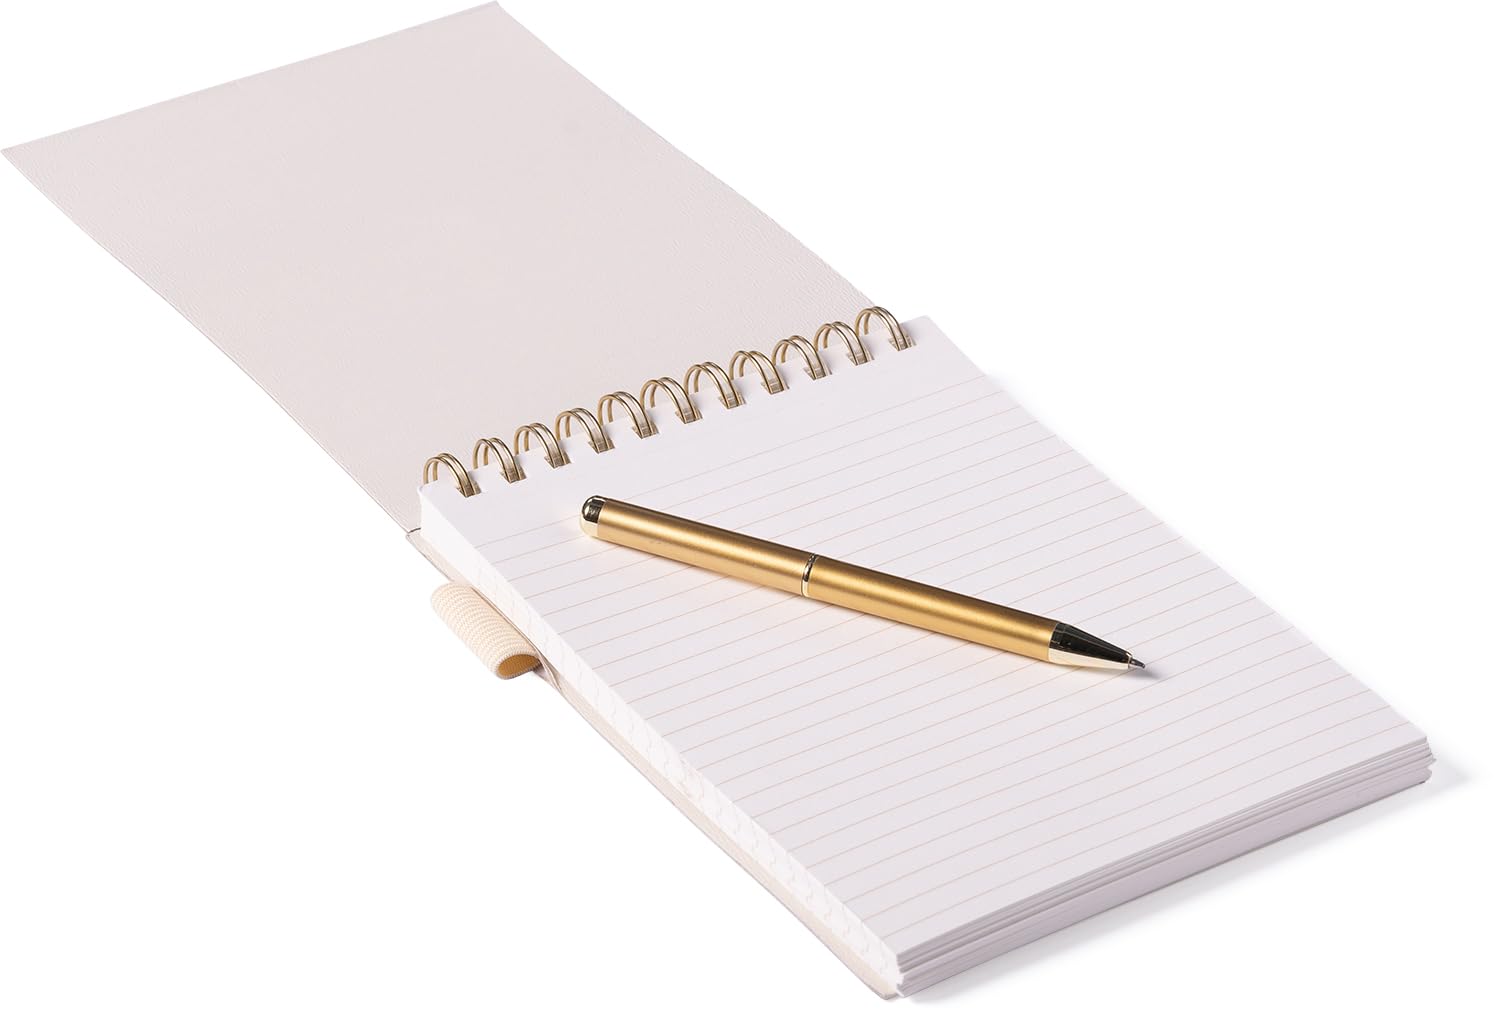 A5 Notepad Ideal for School, College or Work